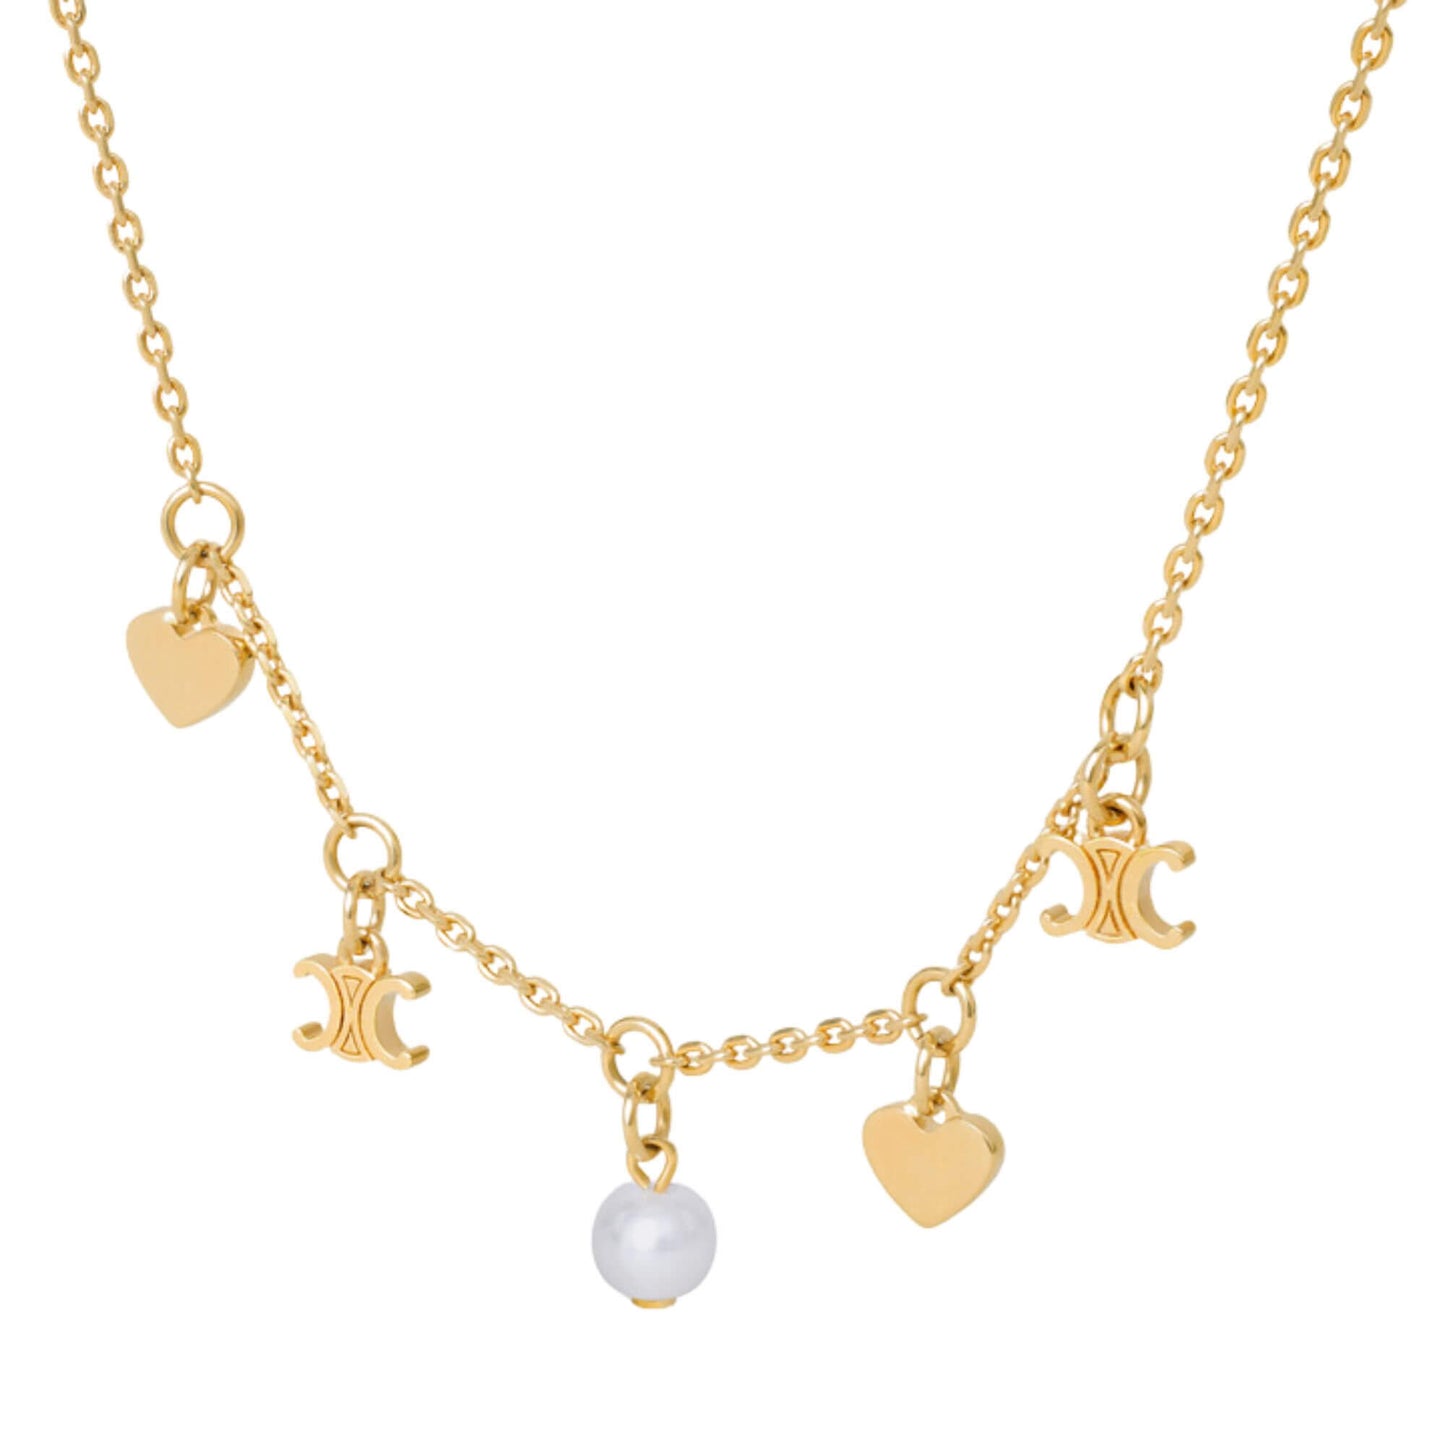 CELINE COEUR CHARMS NECKLACE IN BRASS WITH GOLD FINISH AND RESIN PEARL